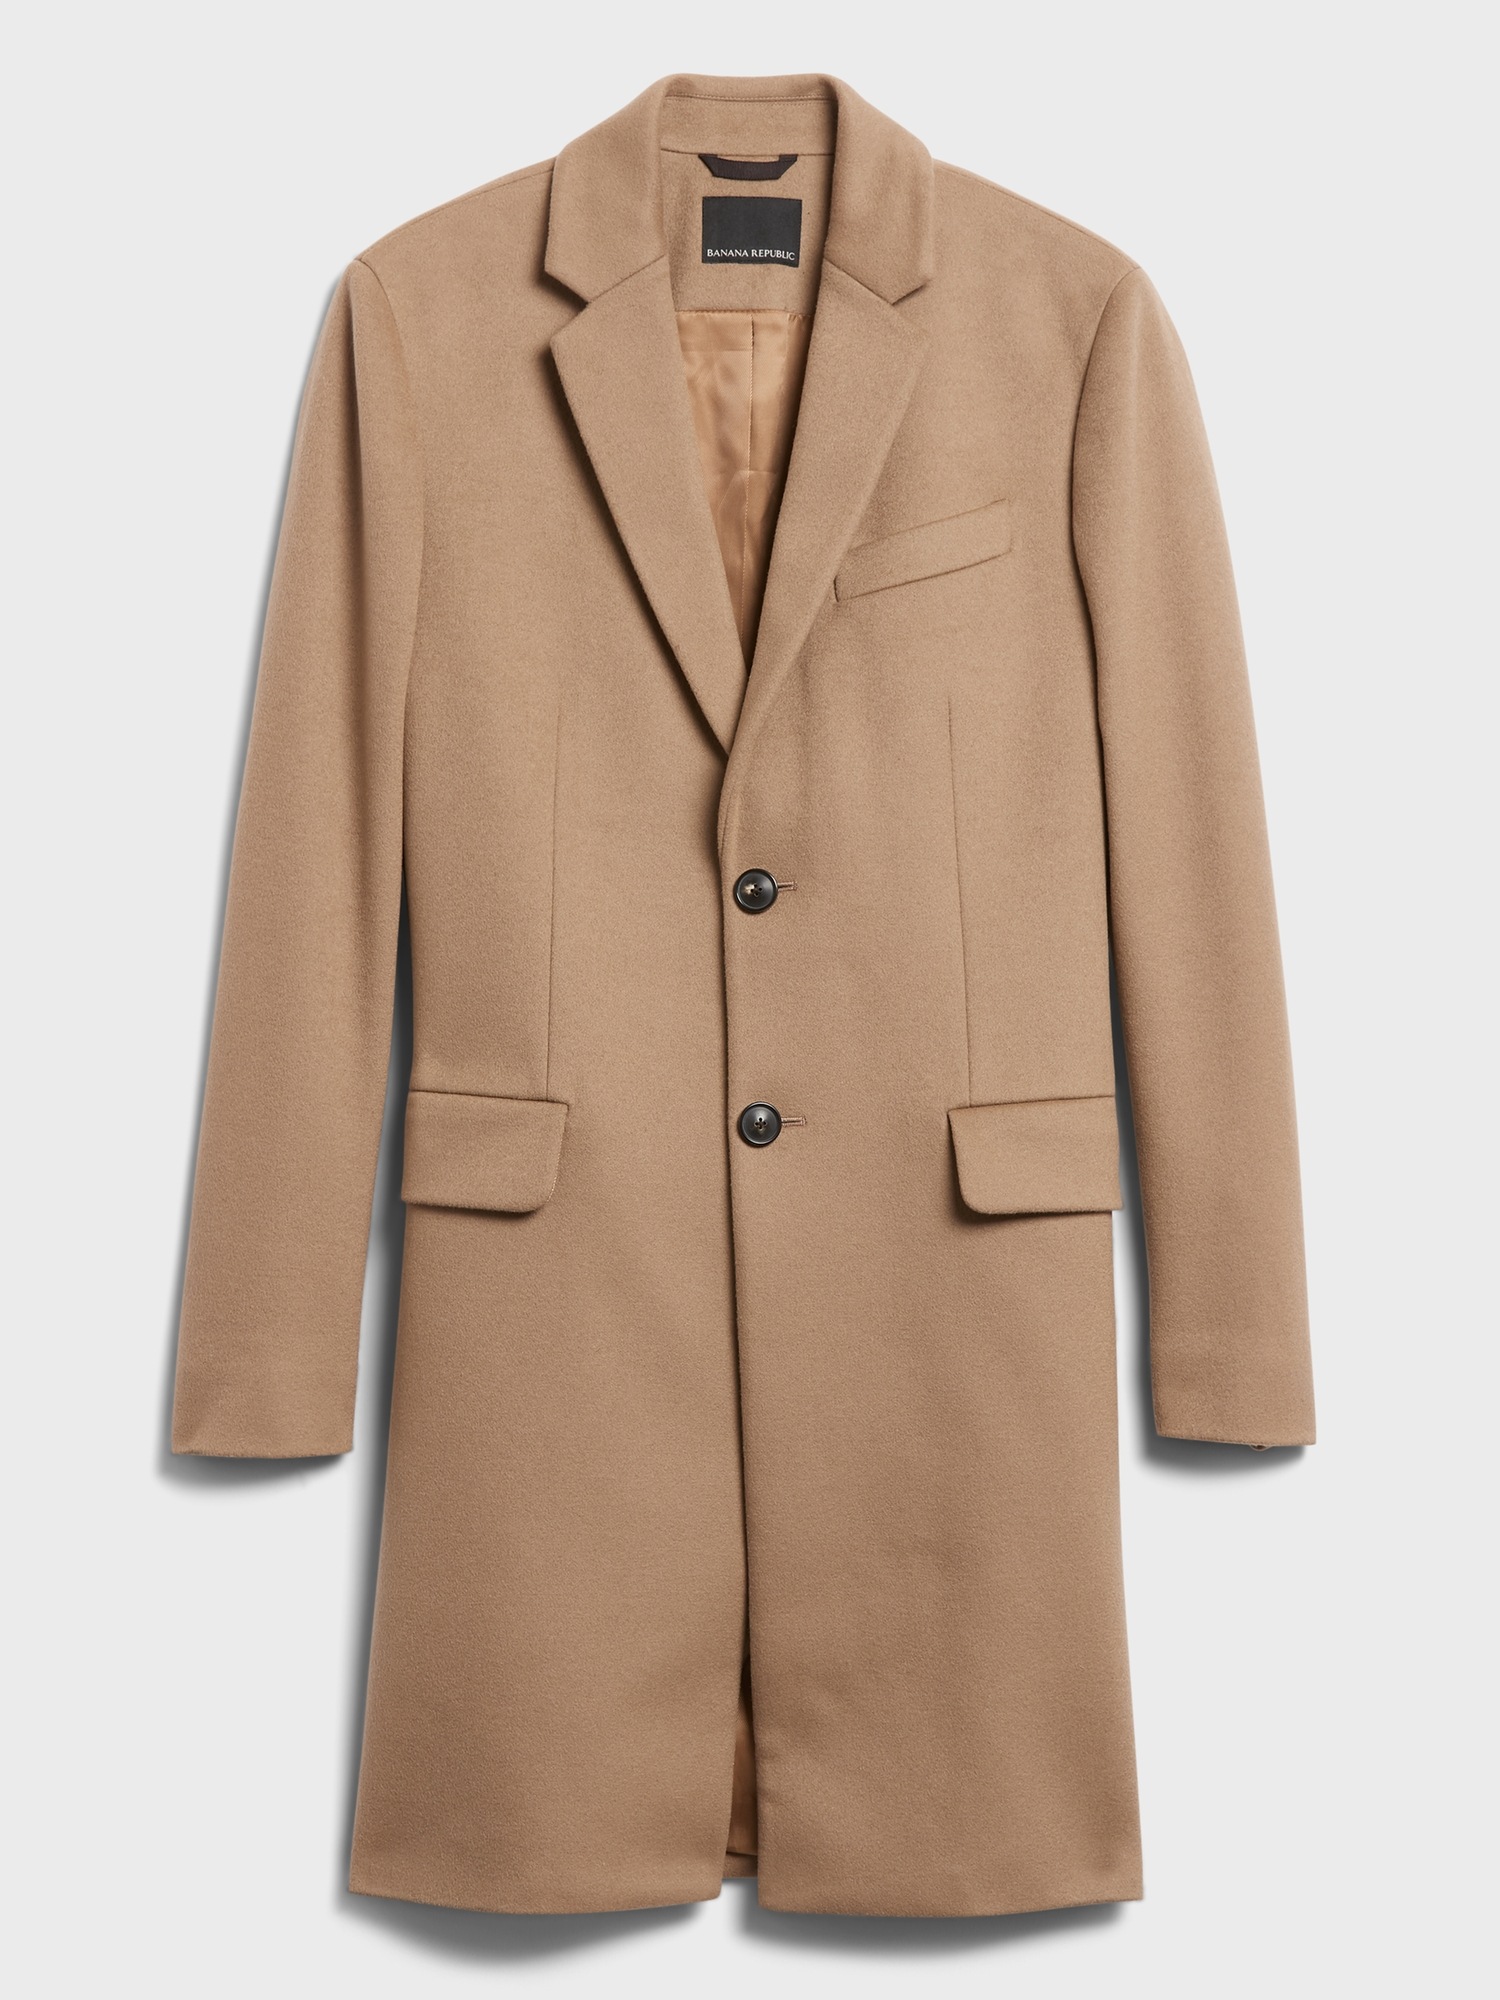 Banana Republic Factory Mens Camel Coat - Free shipping on orders over ...